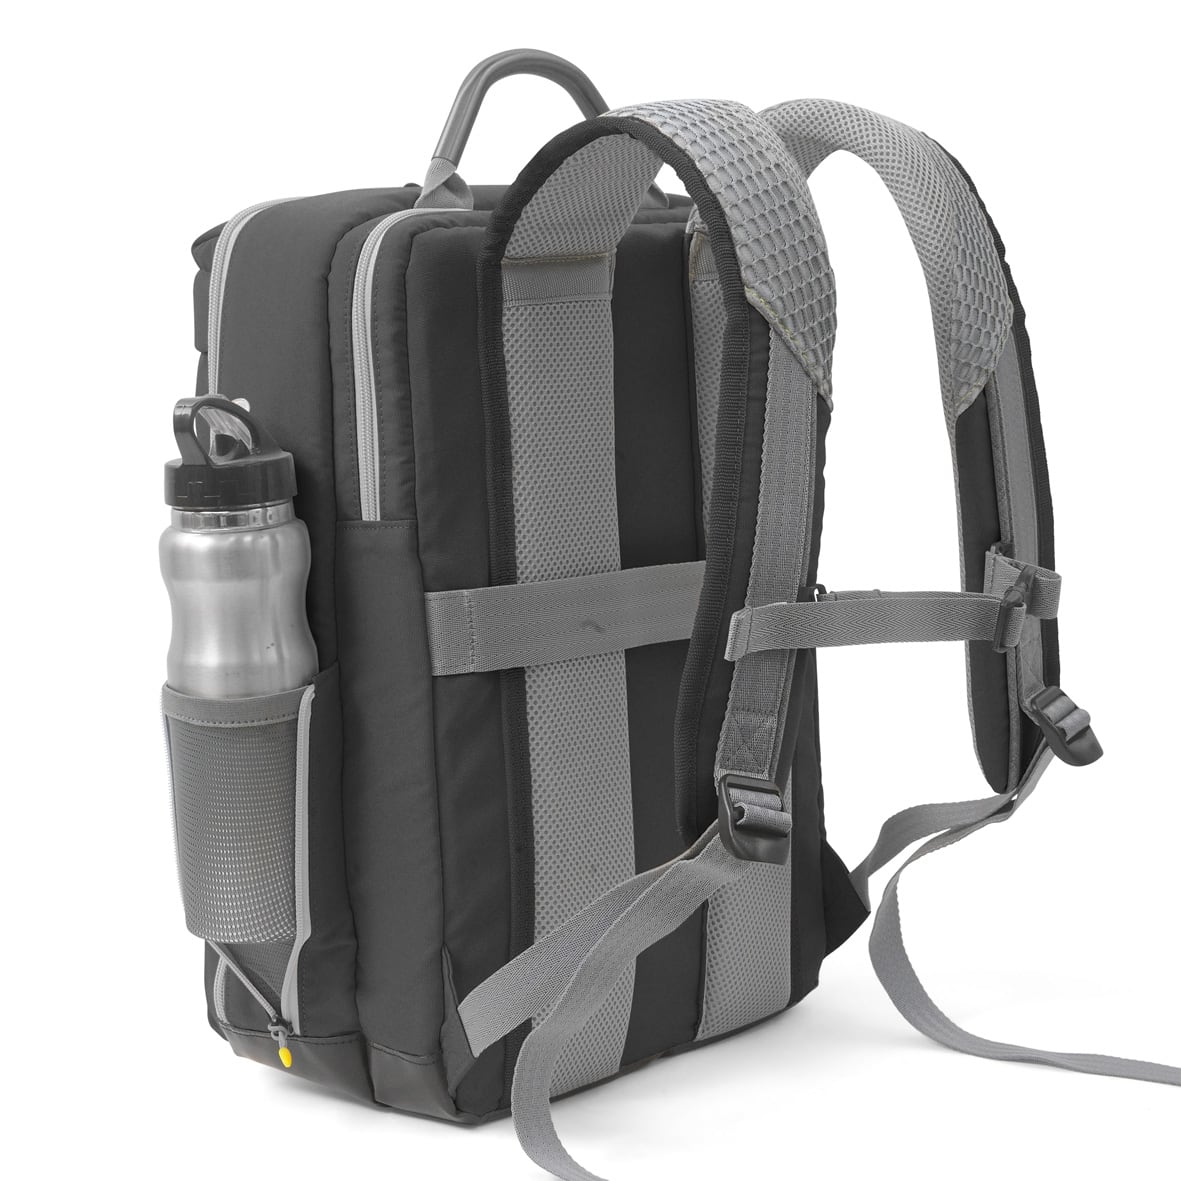 ORCA OR-554G Laptop Backpack for Daily Use Gray